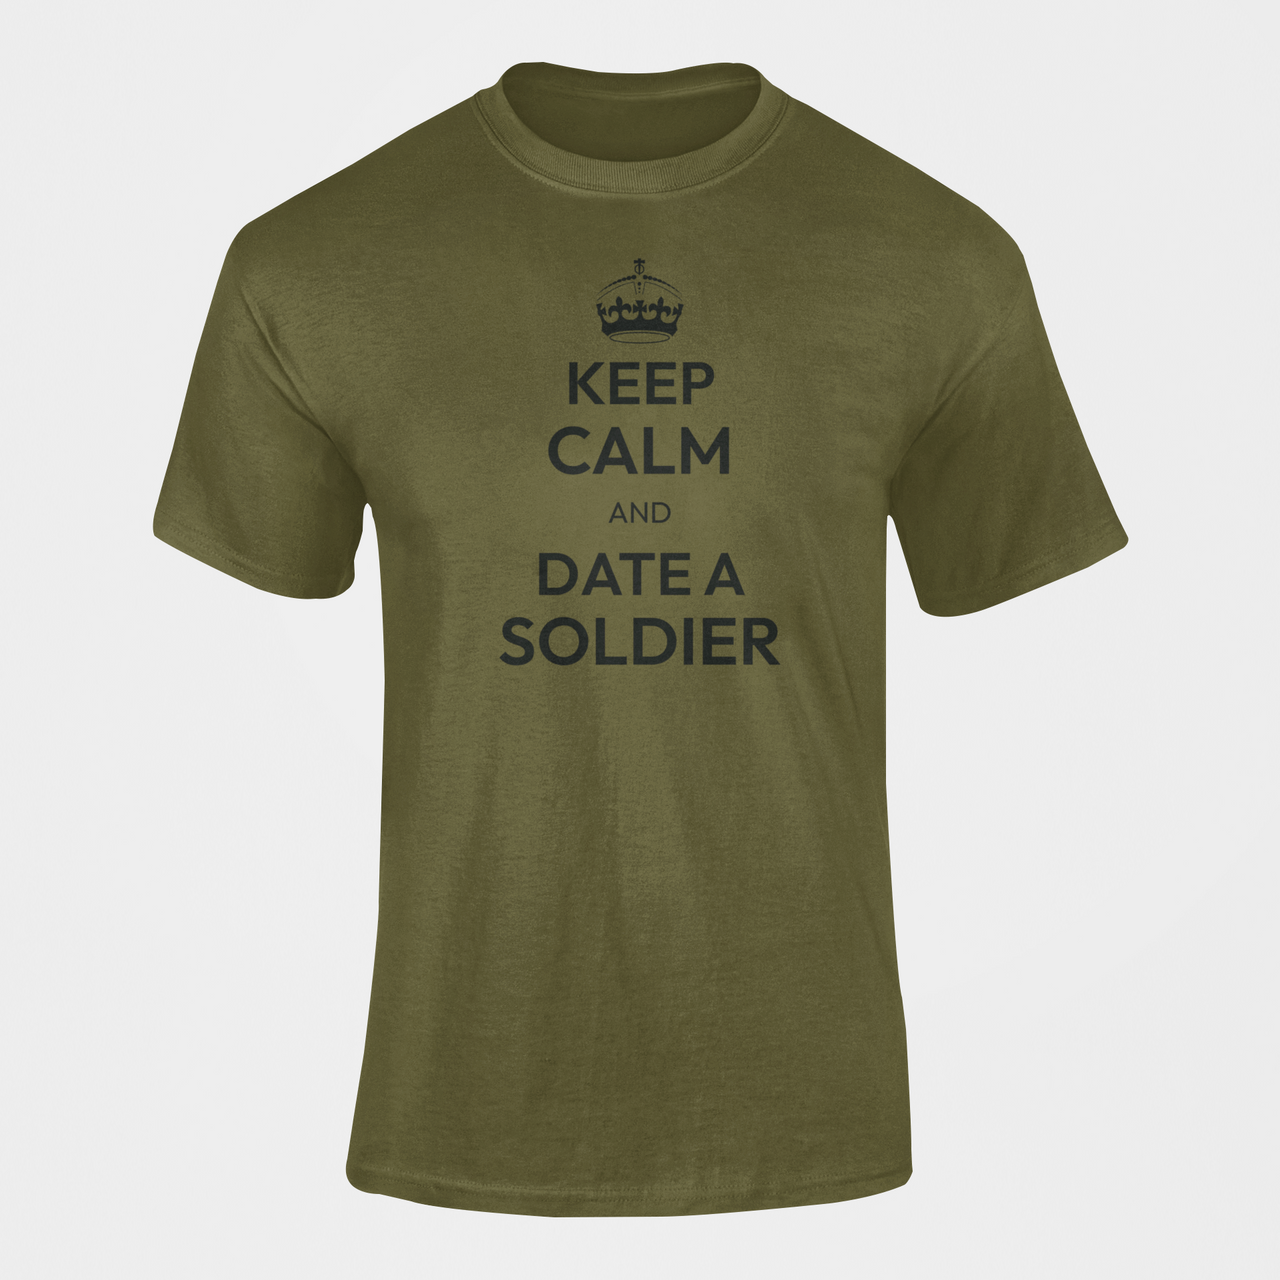 Military T-shirt - Keep Calm and Date a Soldier (Men)